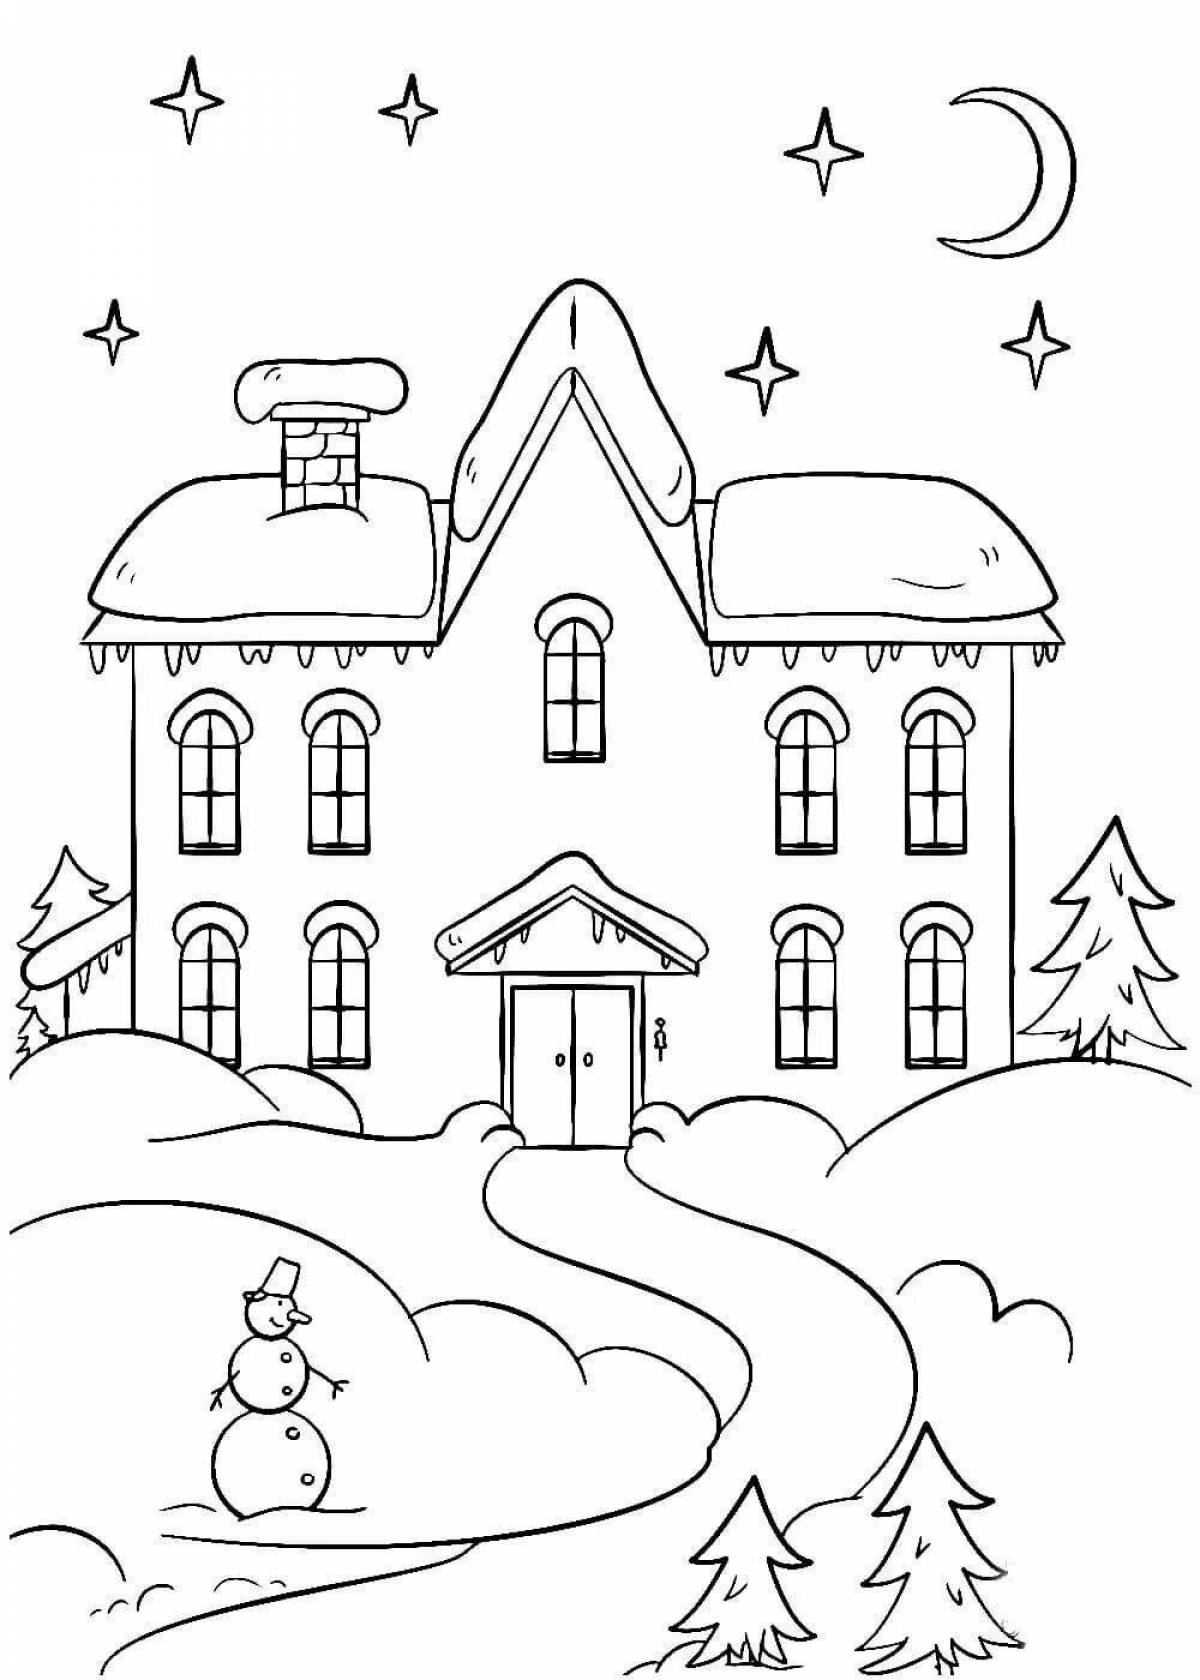 Adorable winter city coloring book for kids